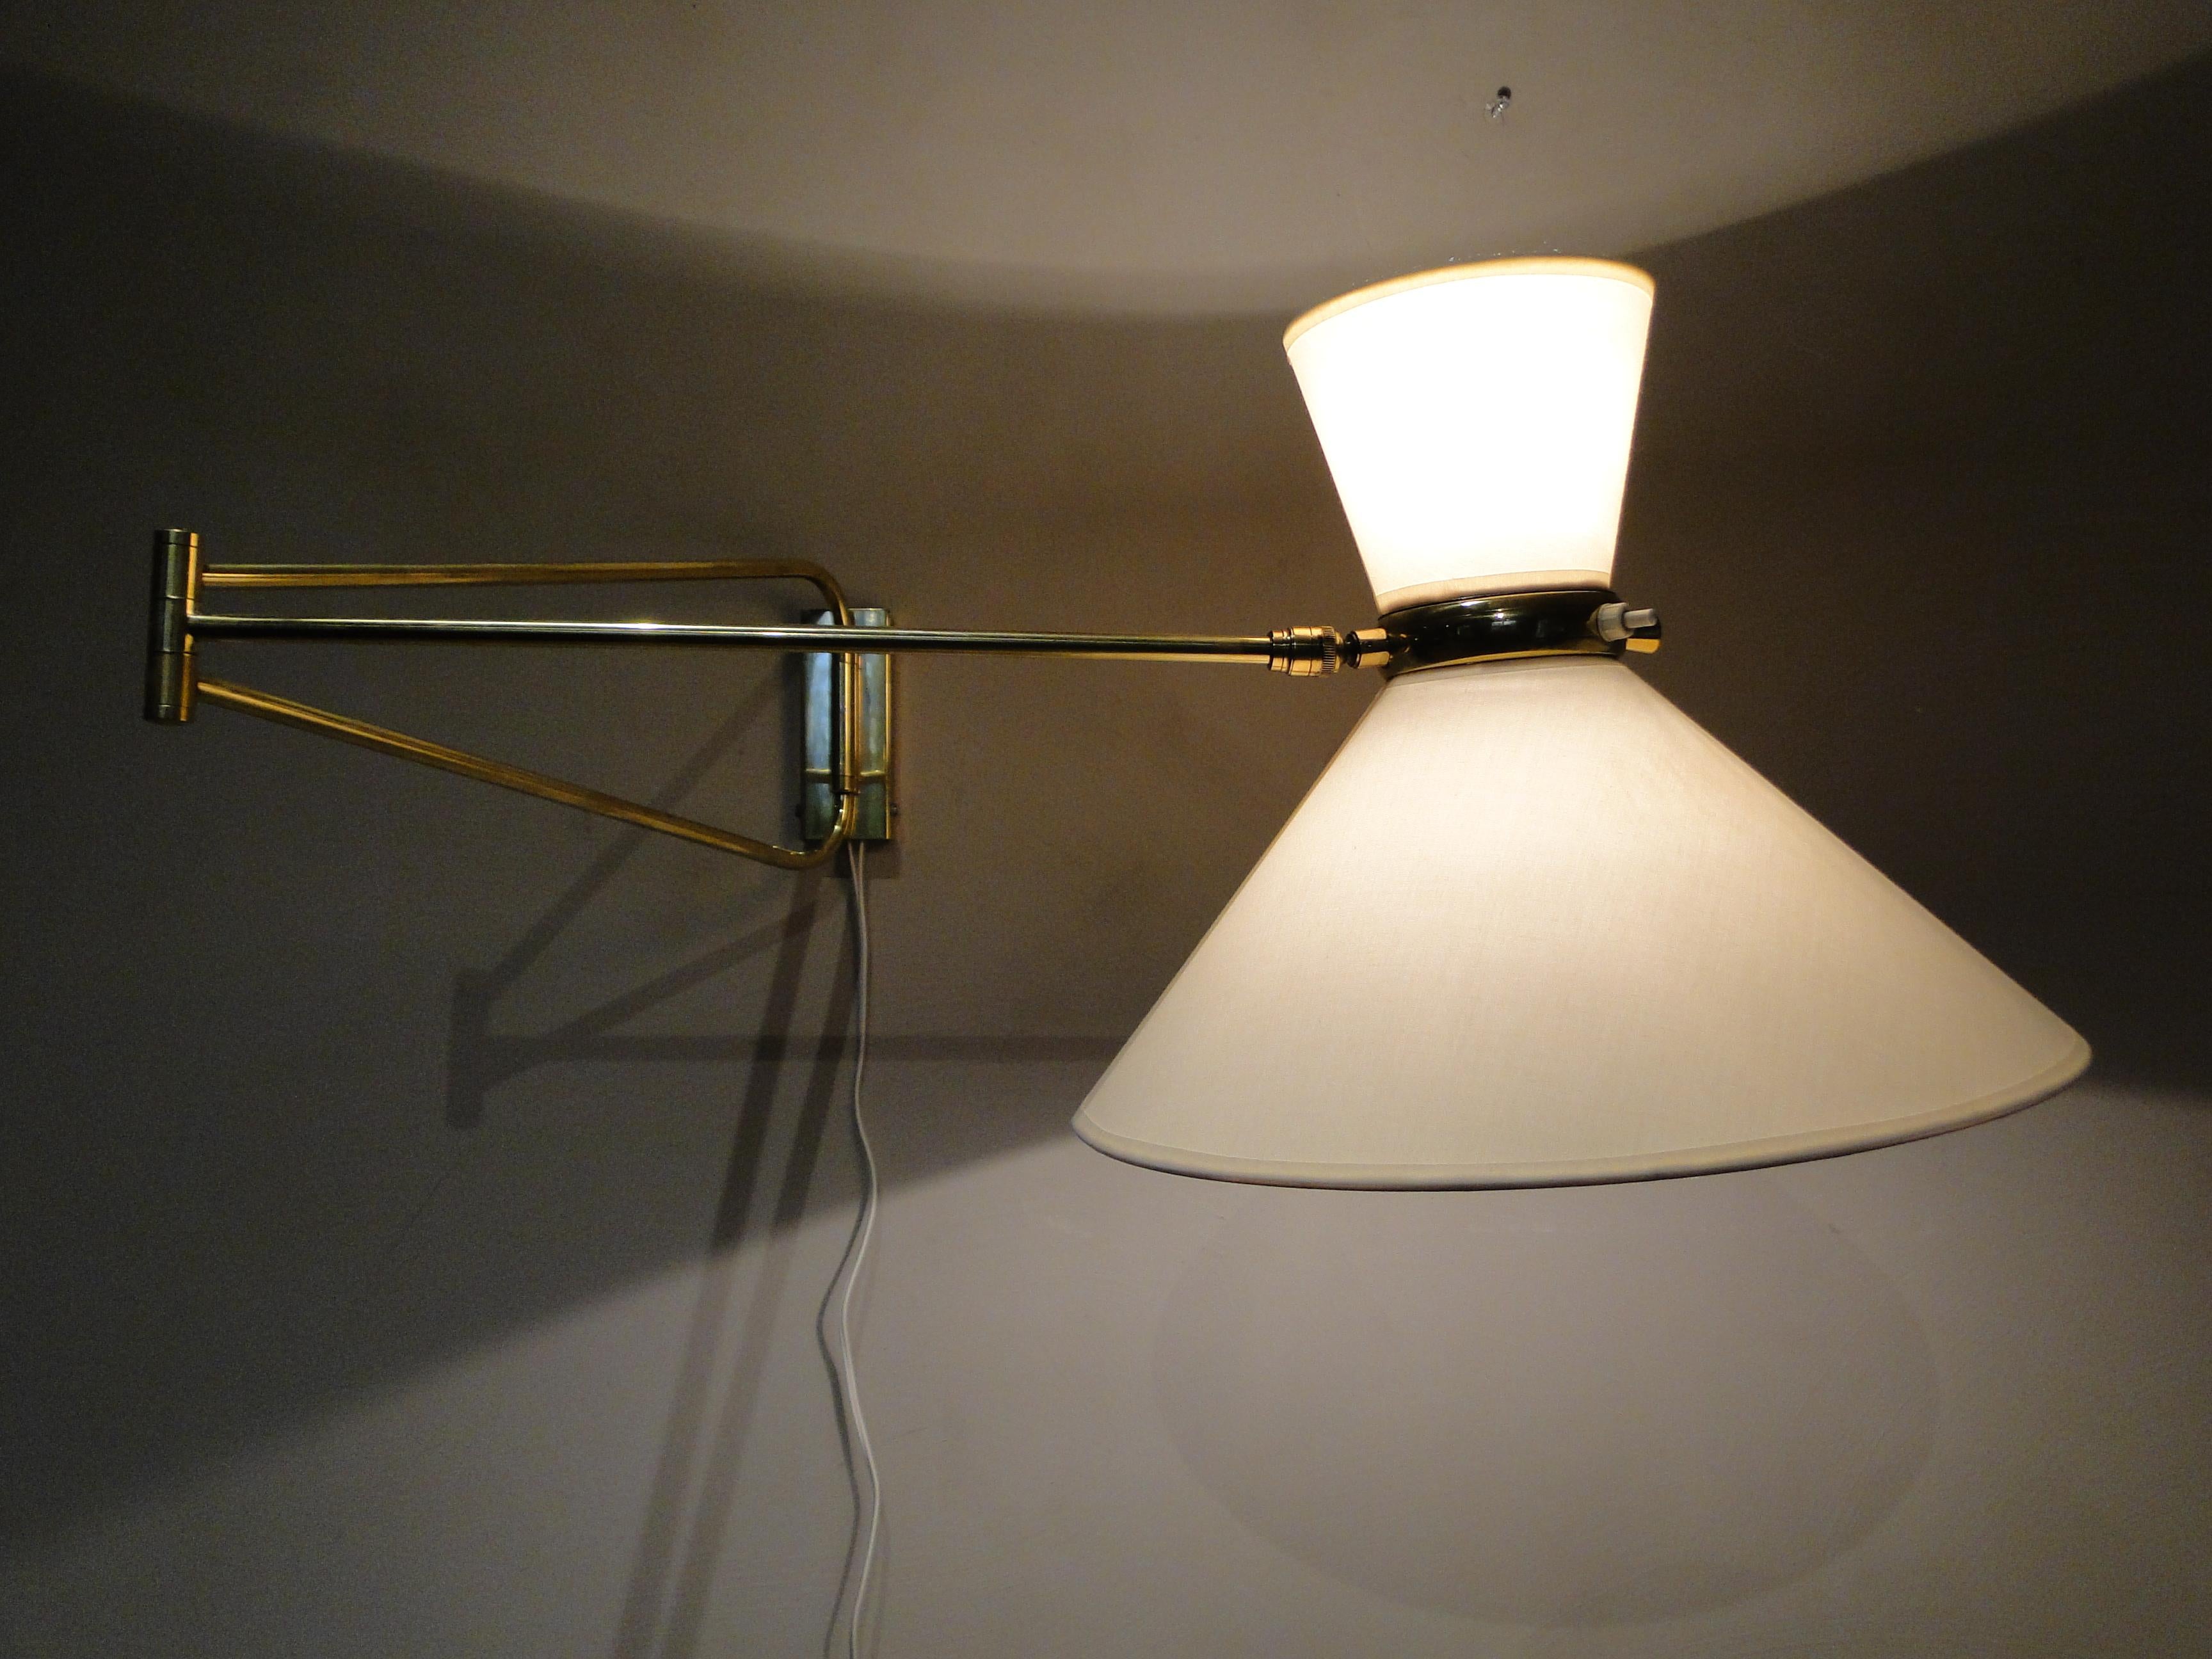 Vintage very large wall lamp by René Mathieu 1950 France.

Wall light by René Mathieu from the 1950s.

2-Arm articulated brass stem.

The double bulb sconce has independent switches for the up and down lights. 

New diabolo lampshade.

36 cm in and